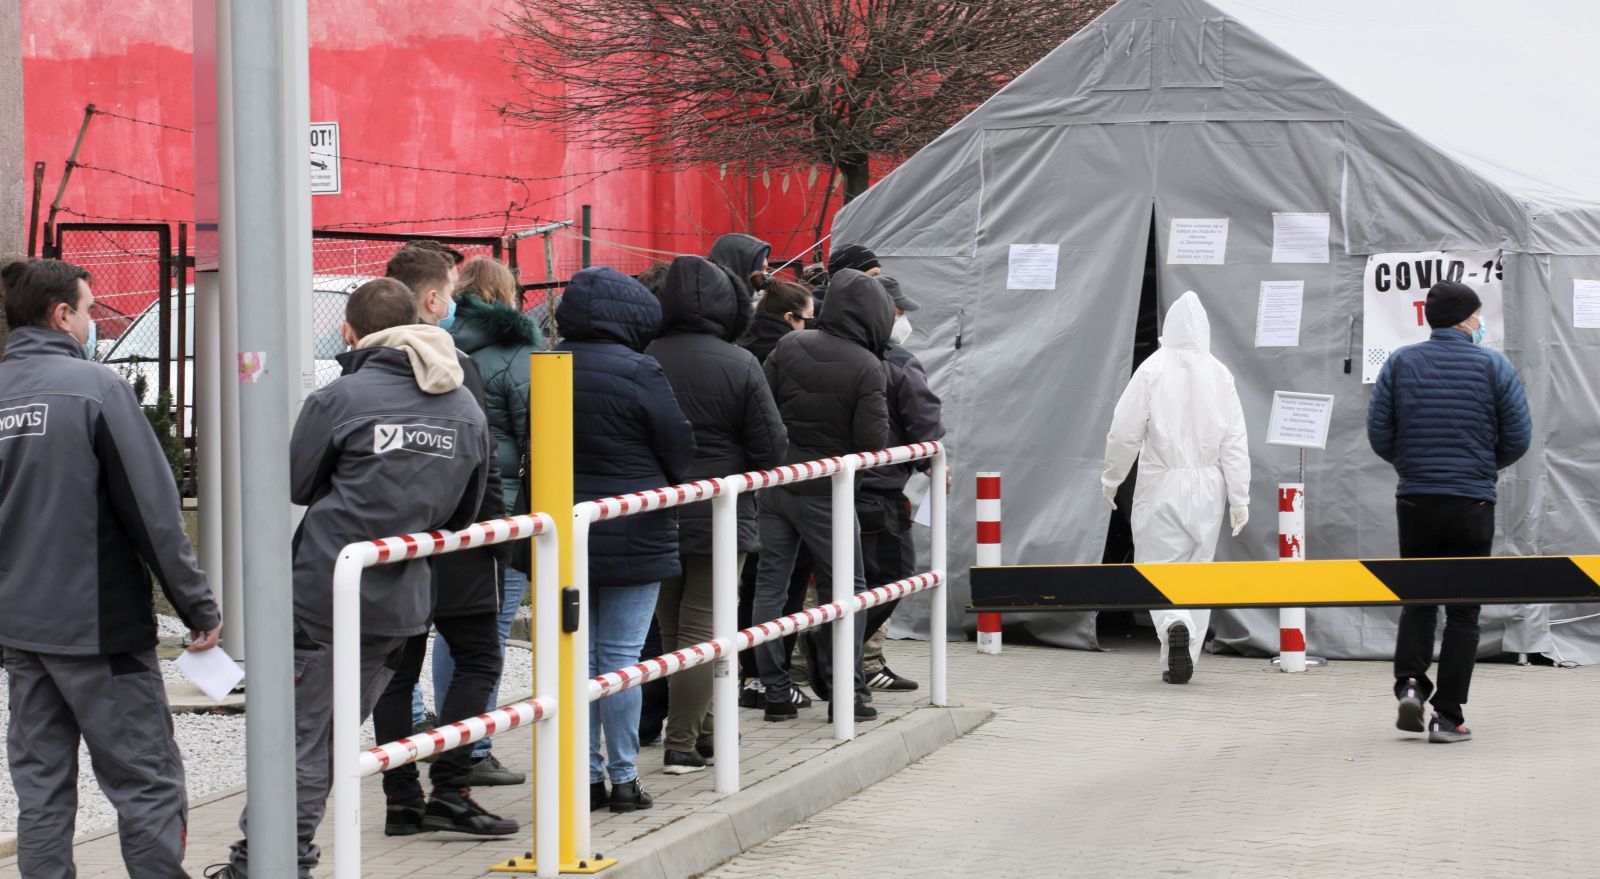 epa09092815 People queue to the entrance of the COVID-19 testing lab at Polish-German border in Slubice, western Poland, 24 March 2021, amid the ongoing pandemic of the COVID-19 disease caused by the SARS-CoV-2 coronavirus. Currently, adults entering Germany must produce a negative SARS-CoV-2 test result obtained within the past four days.  EPA/Lech Muszynski POLAND OUT